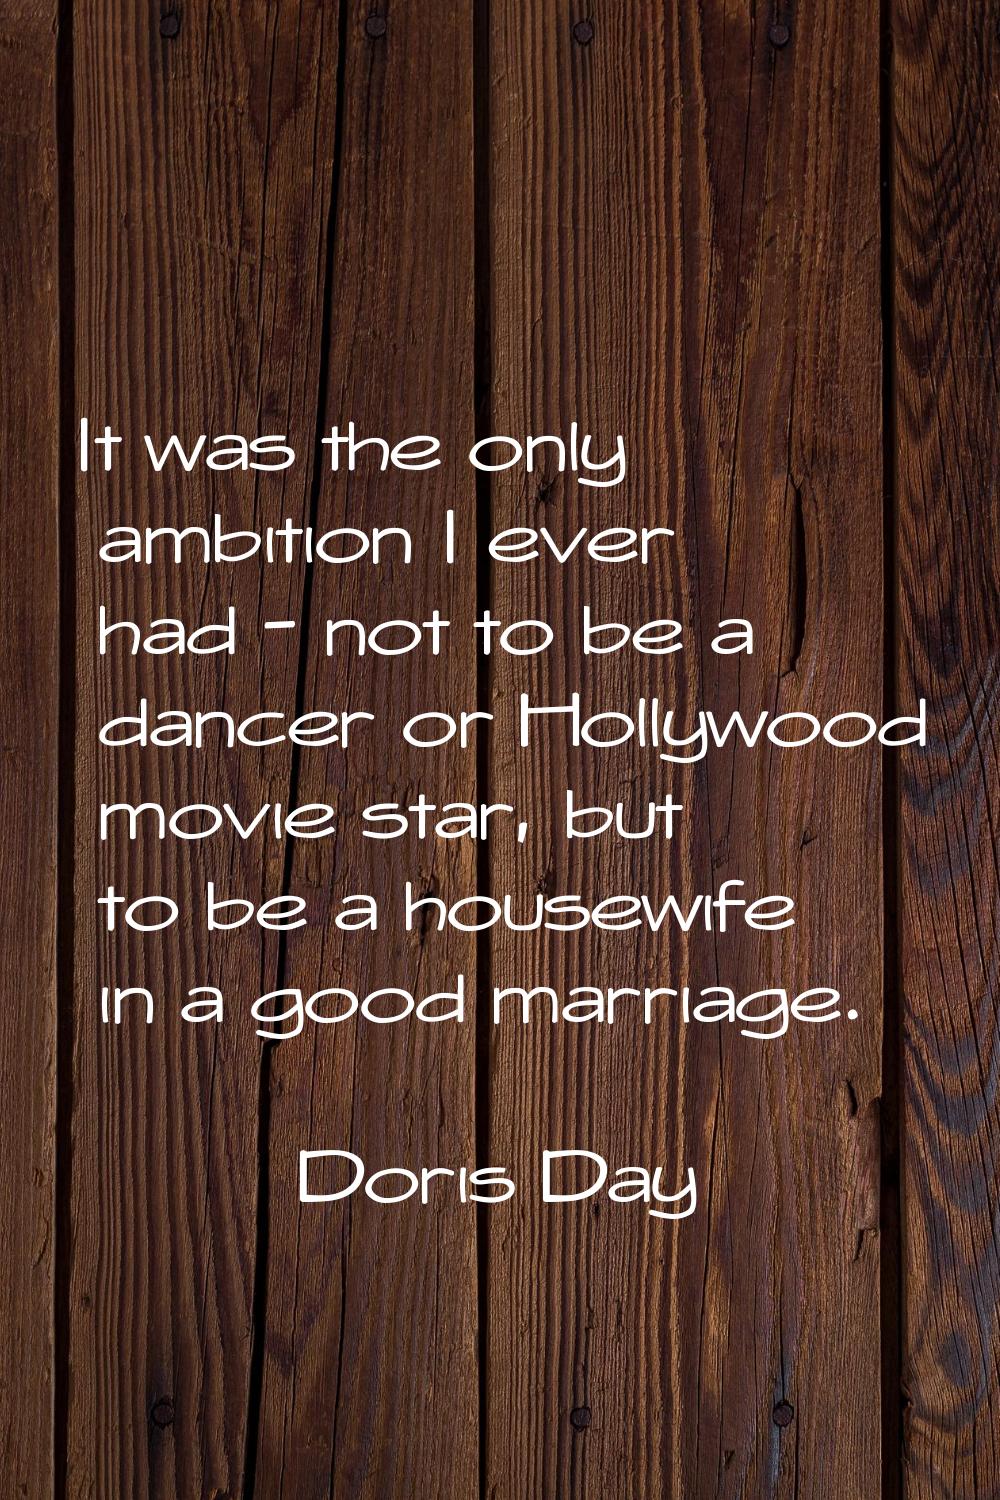 It was the only ambition I ever had - not to be a dancer or Hollywood movie star, but to be a house